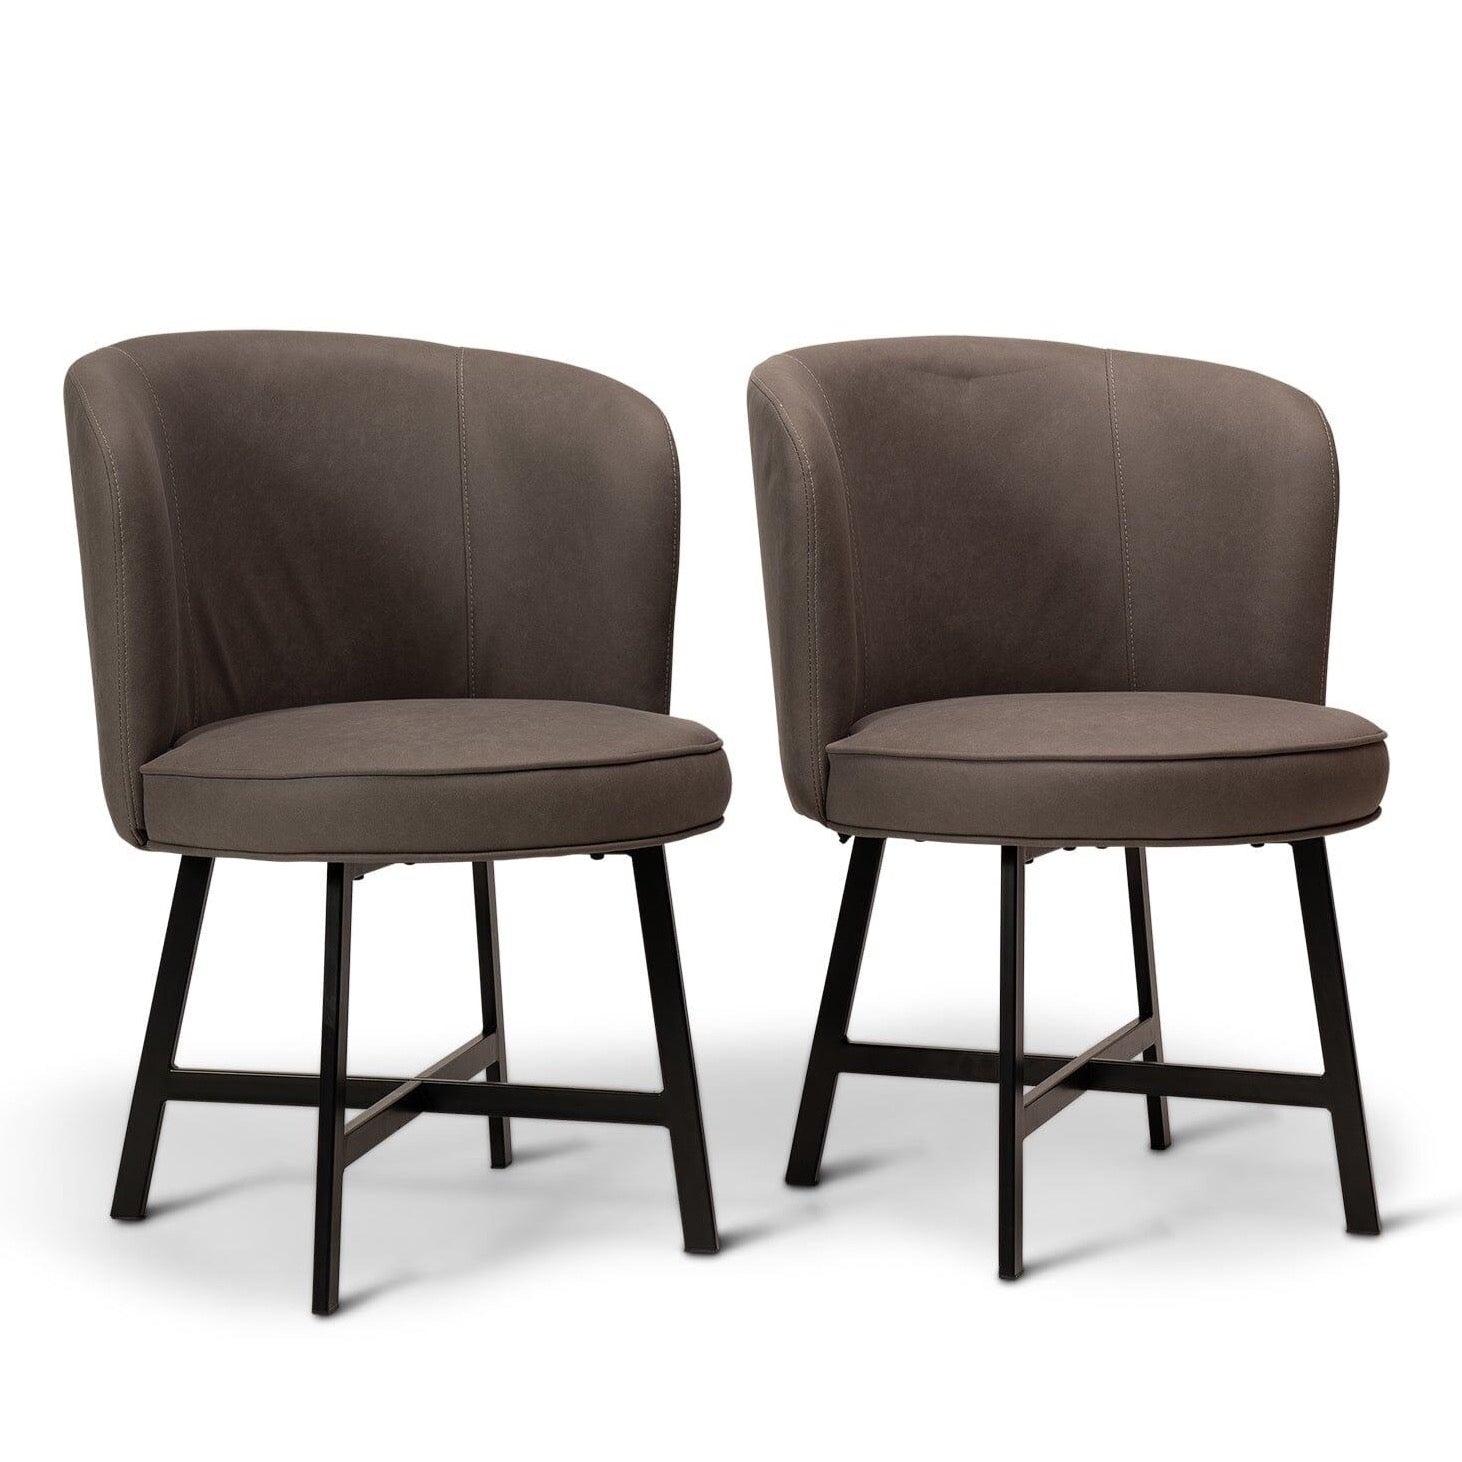 Jacob dining chairs - set of 2 - steel grey and black - Laura James